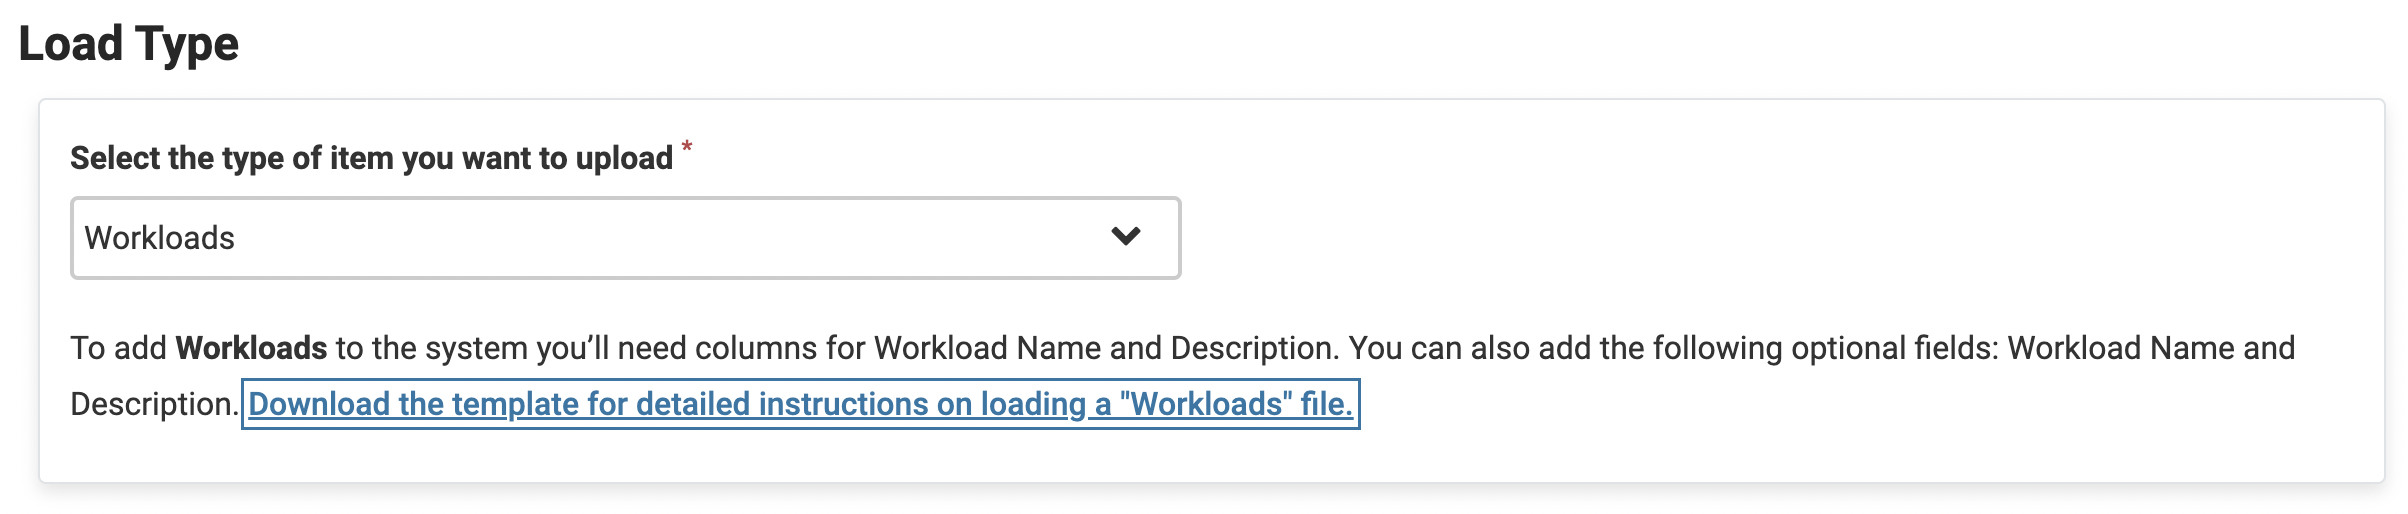 Load Type section with Workloads selected and the Download the template for detailed instructions on loading a "Workloads" file link selected